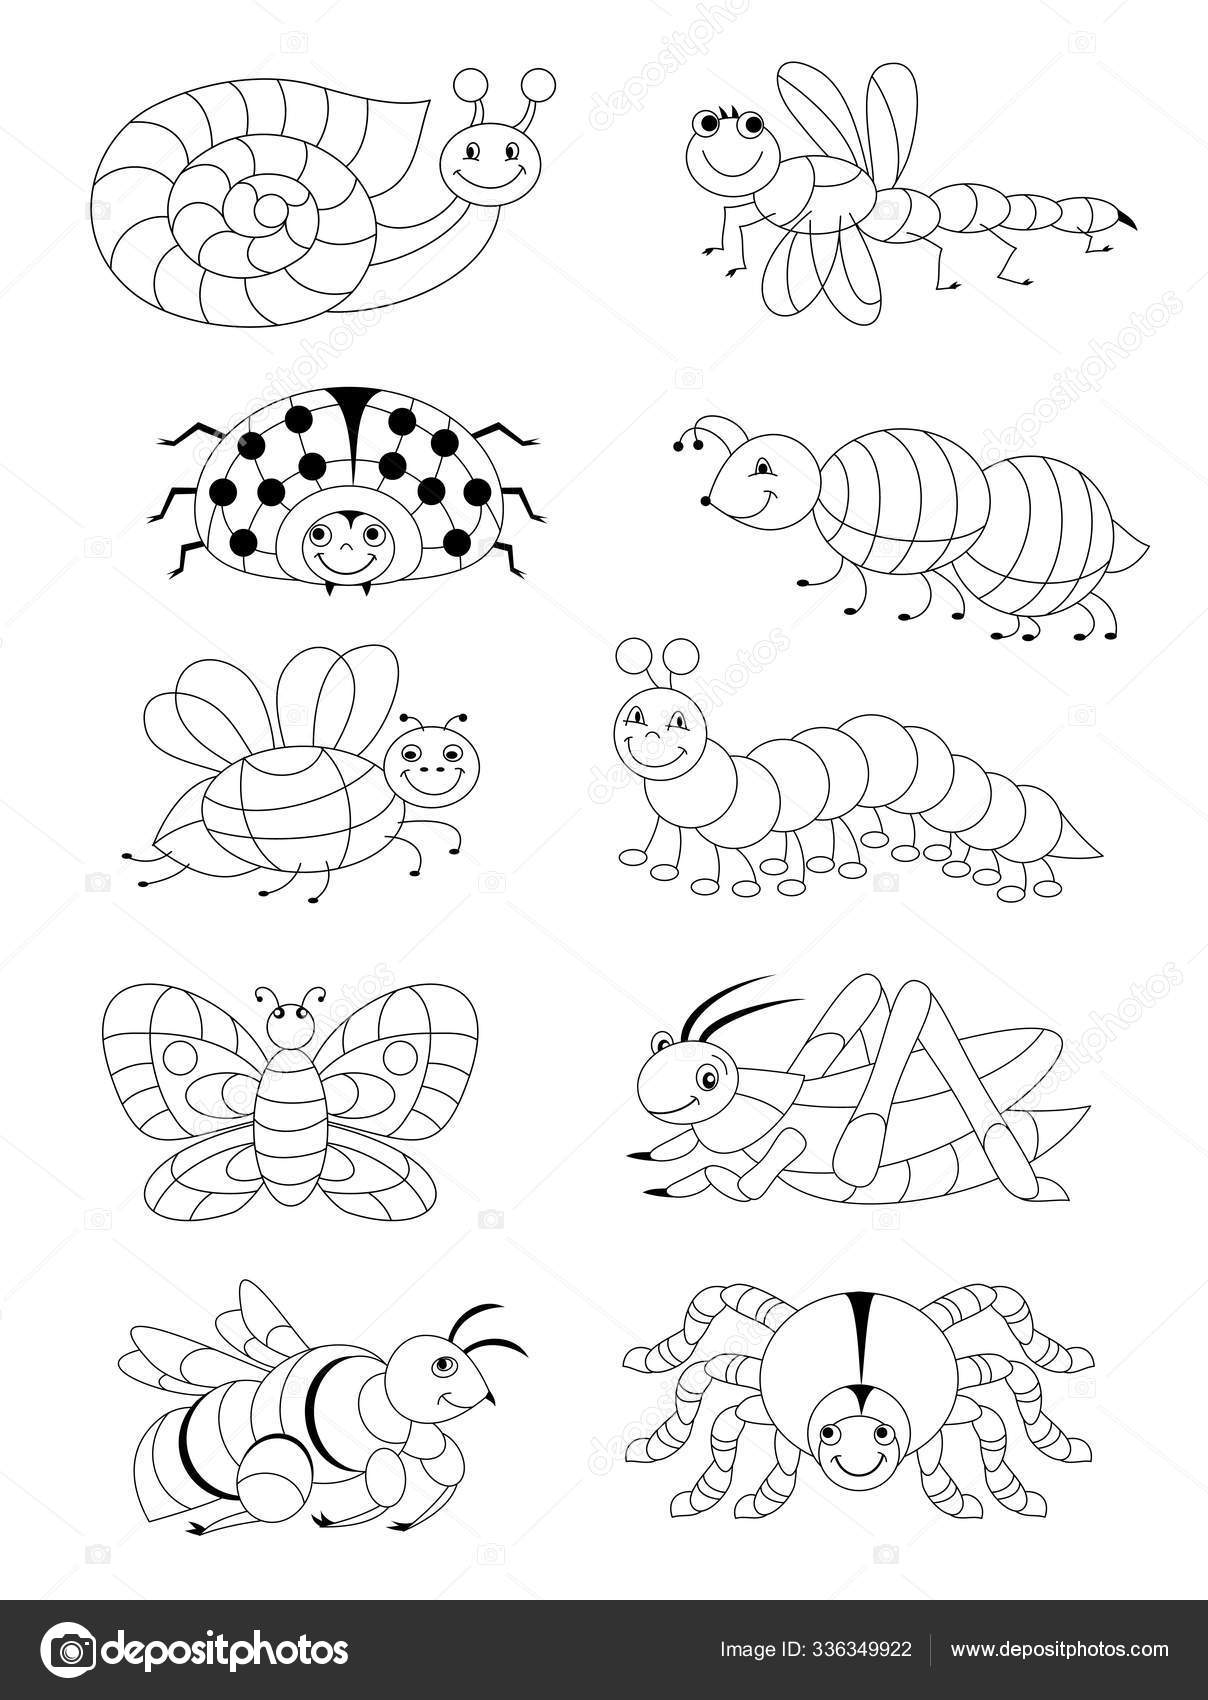 Black white page baby coloring book set different cute insects stock vector by nataljacernecka